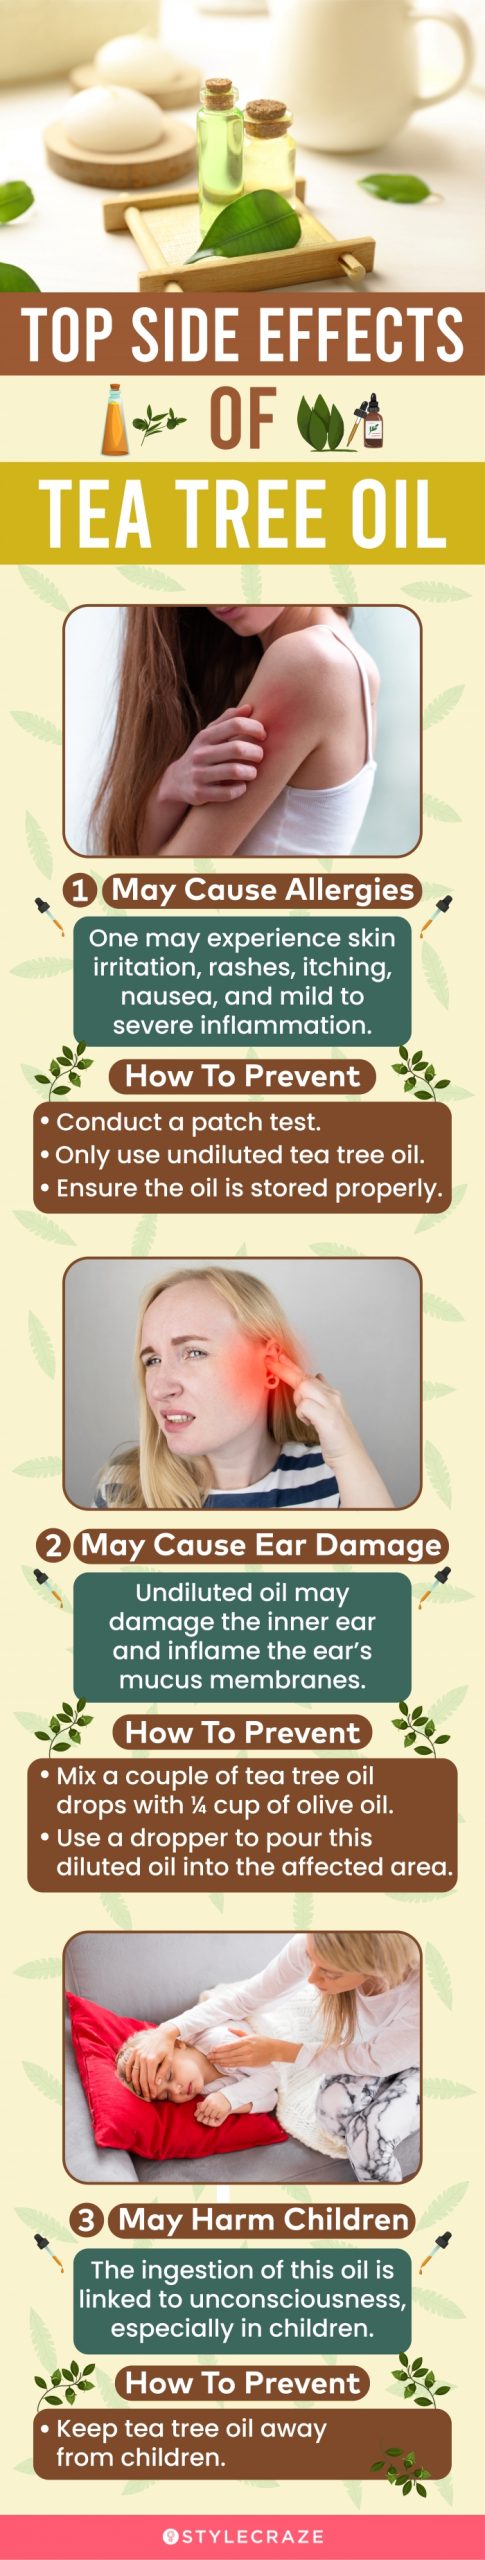 top side effects of tea tree oil (infographic)